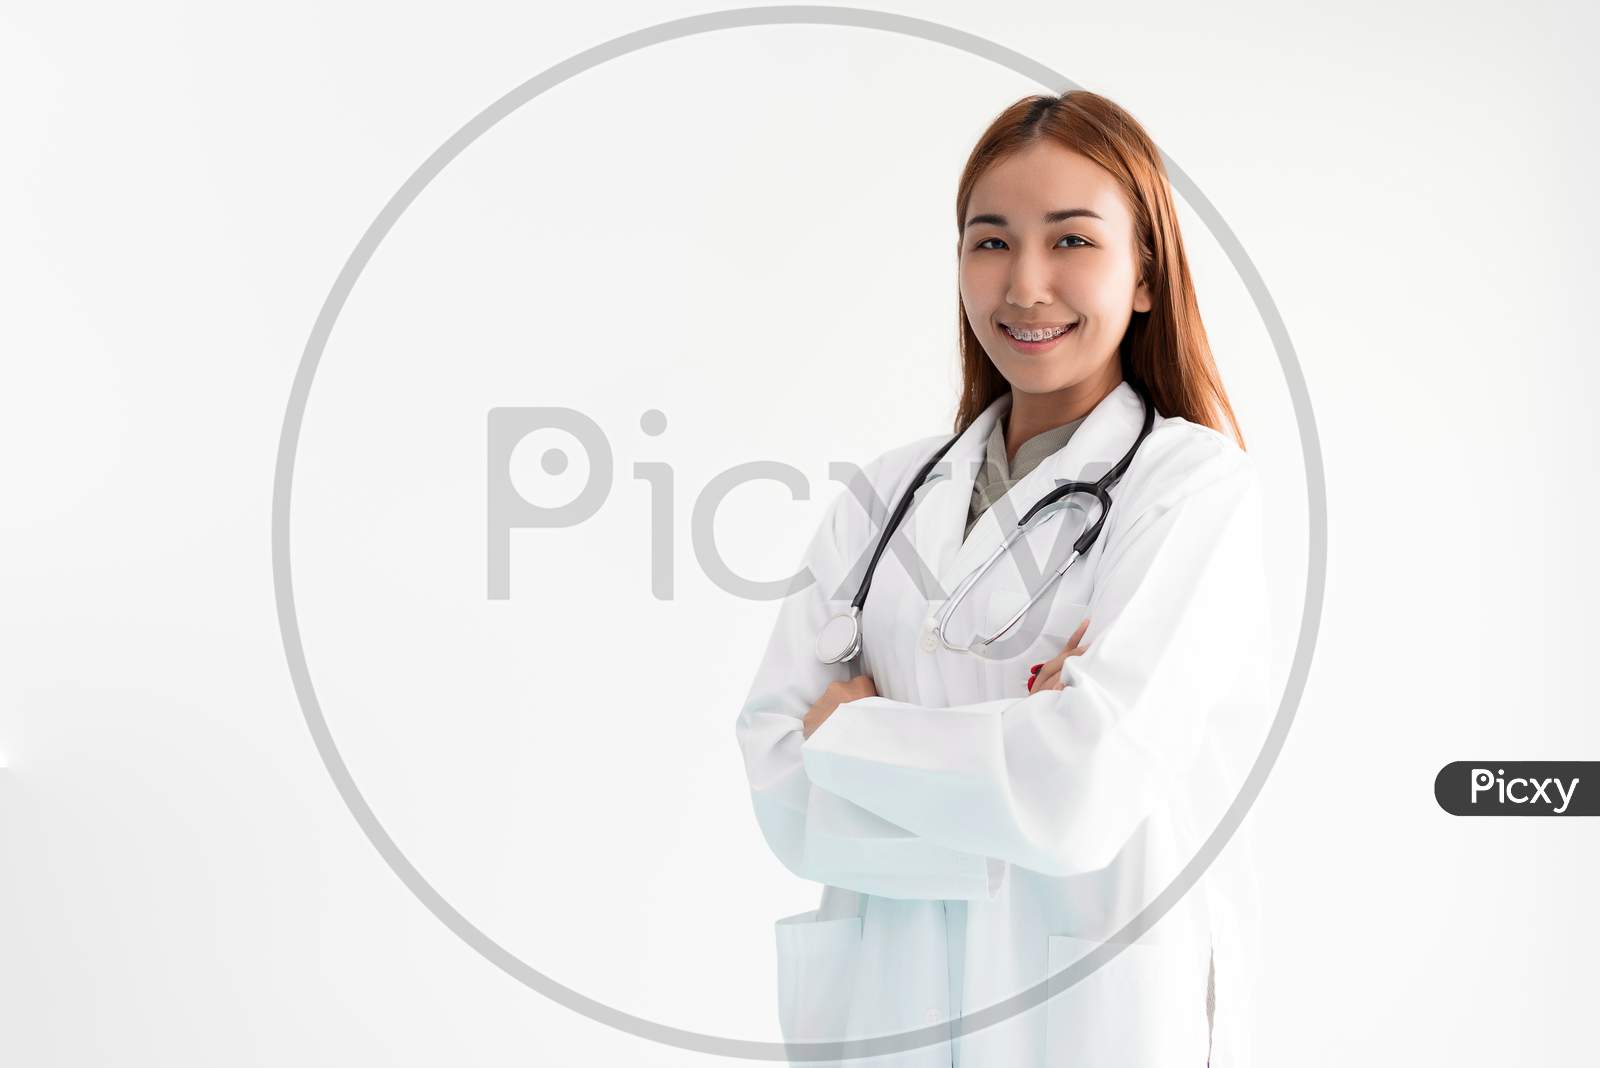 Asian Woman Doctor Is Standing Arms Crossed With Stethoscope On White Background. Medical And Healthcare Concept. Hospital And People Theme.